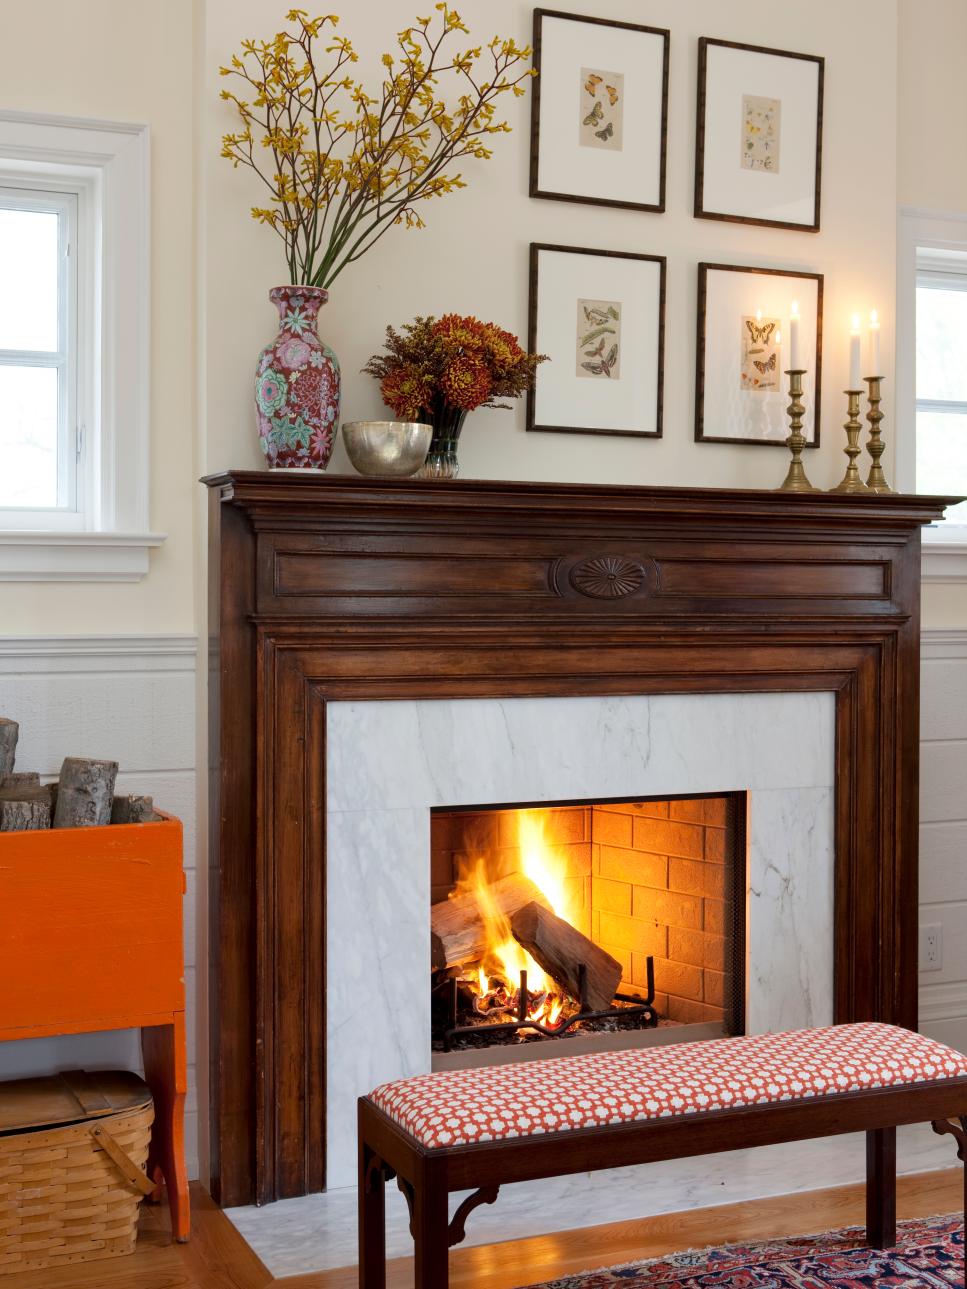 Our Favorite Fall Decorating Ideas HGTV